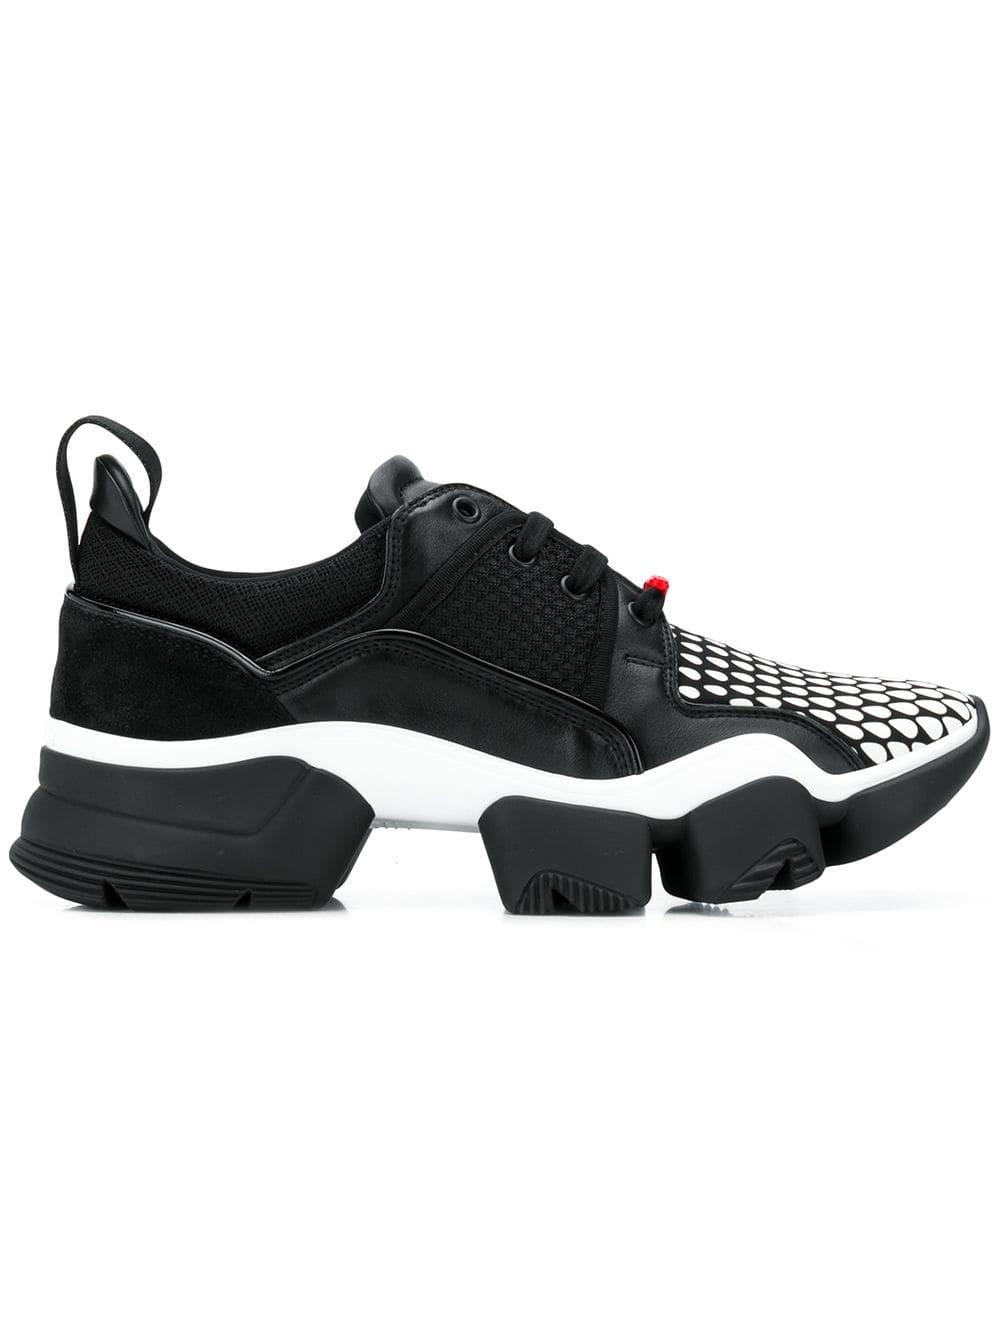 Givenchy Low Jaw Sneakers in Black for Men - Save 60% - Lyst